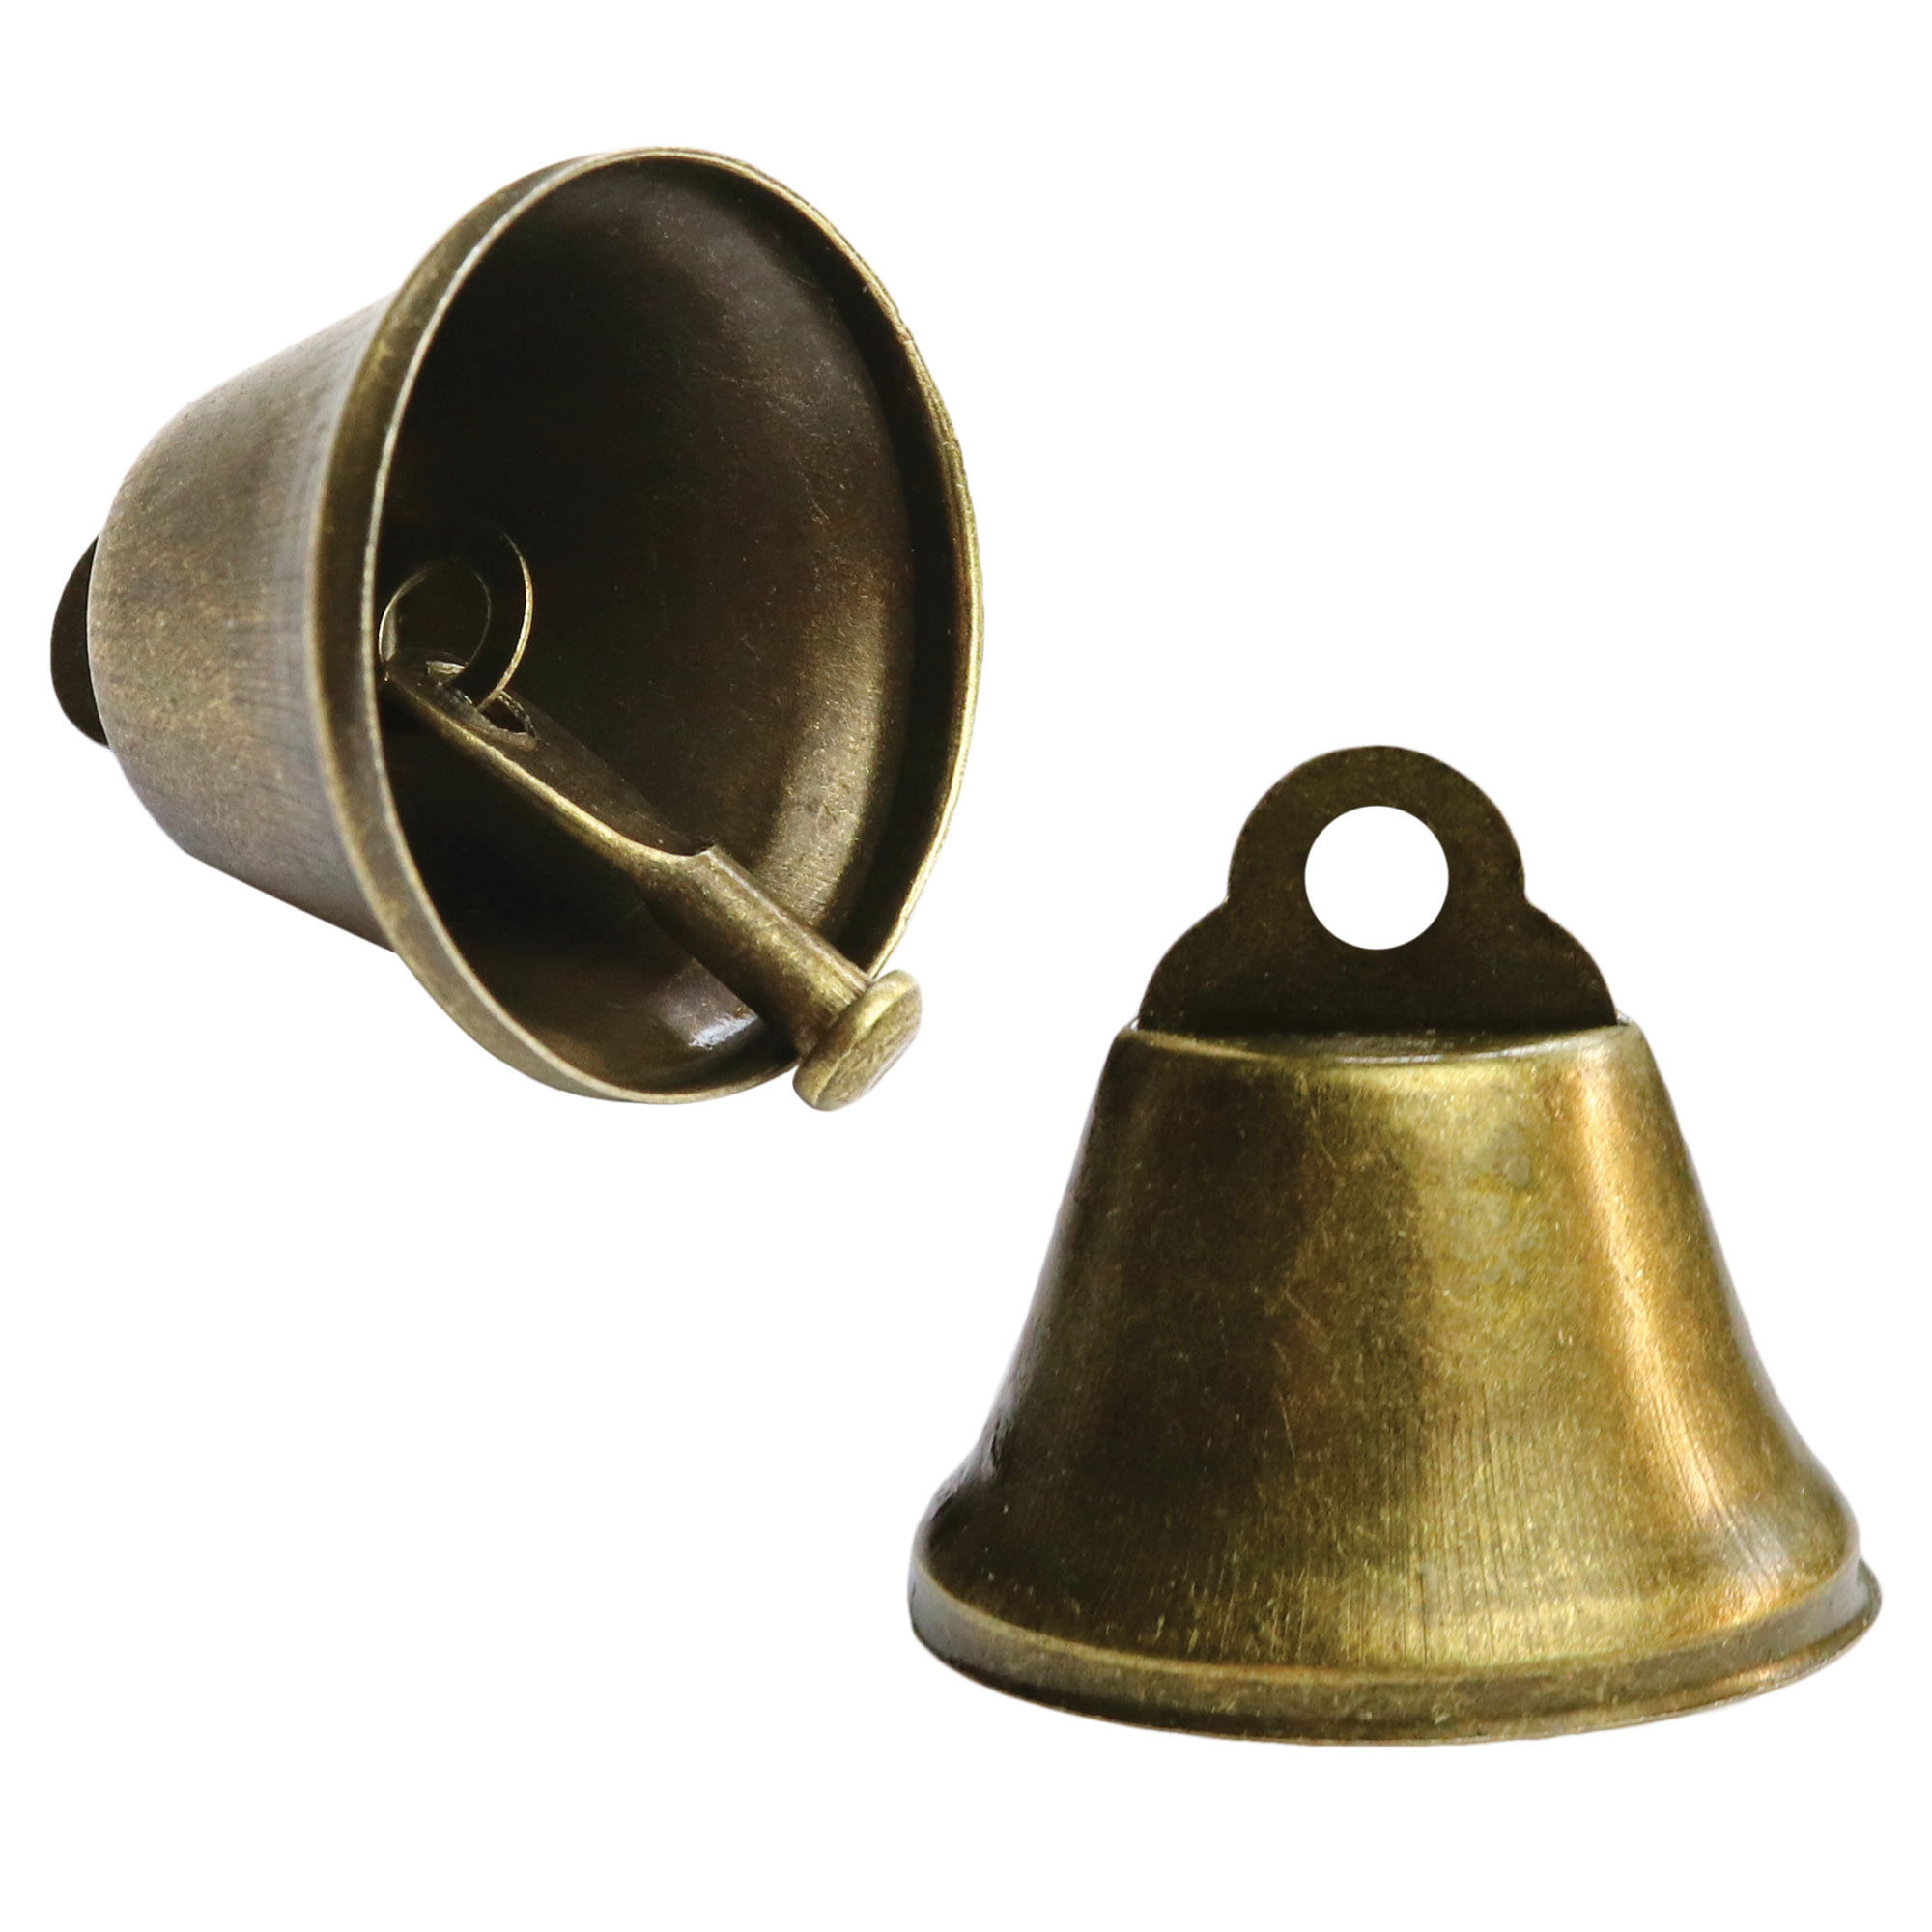 CHGCRAFT 240Pcs 3Sizes Mini Jingle Bell Vintage Bronze Small Elliptical  Antique Brass Bell for Crafts and Christmas Halloween Festival Decor,8-12mm